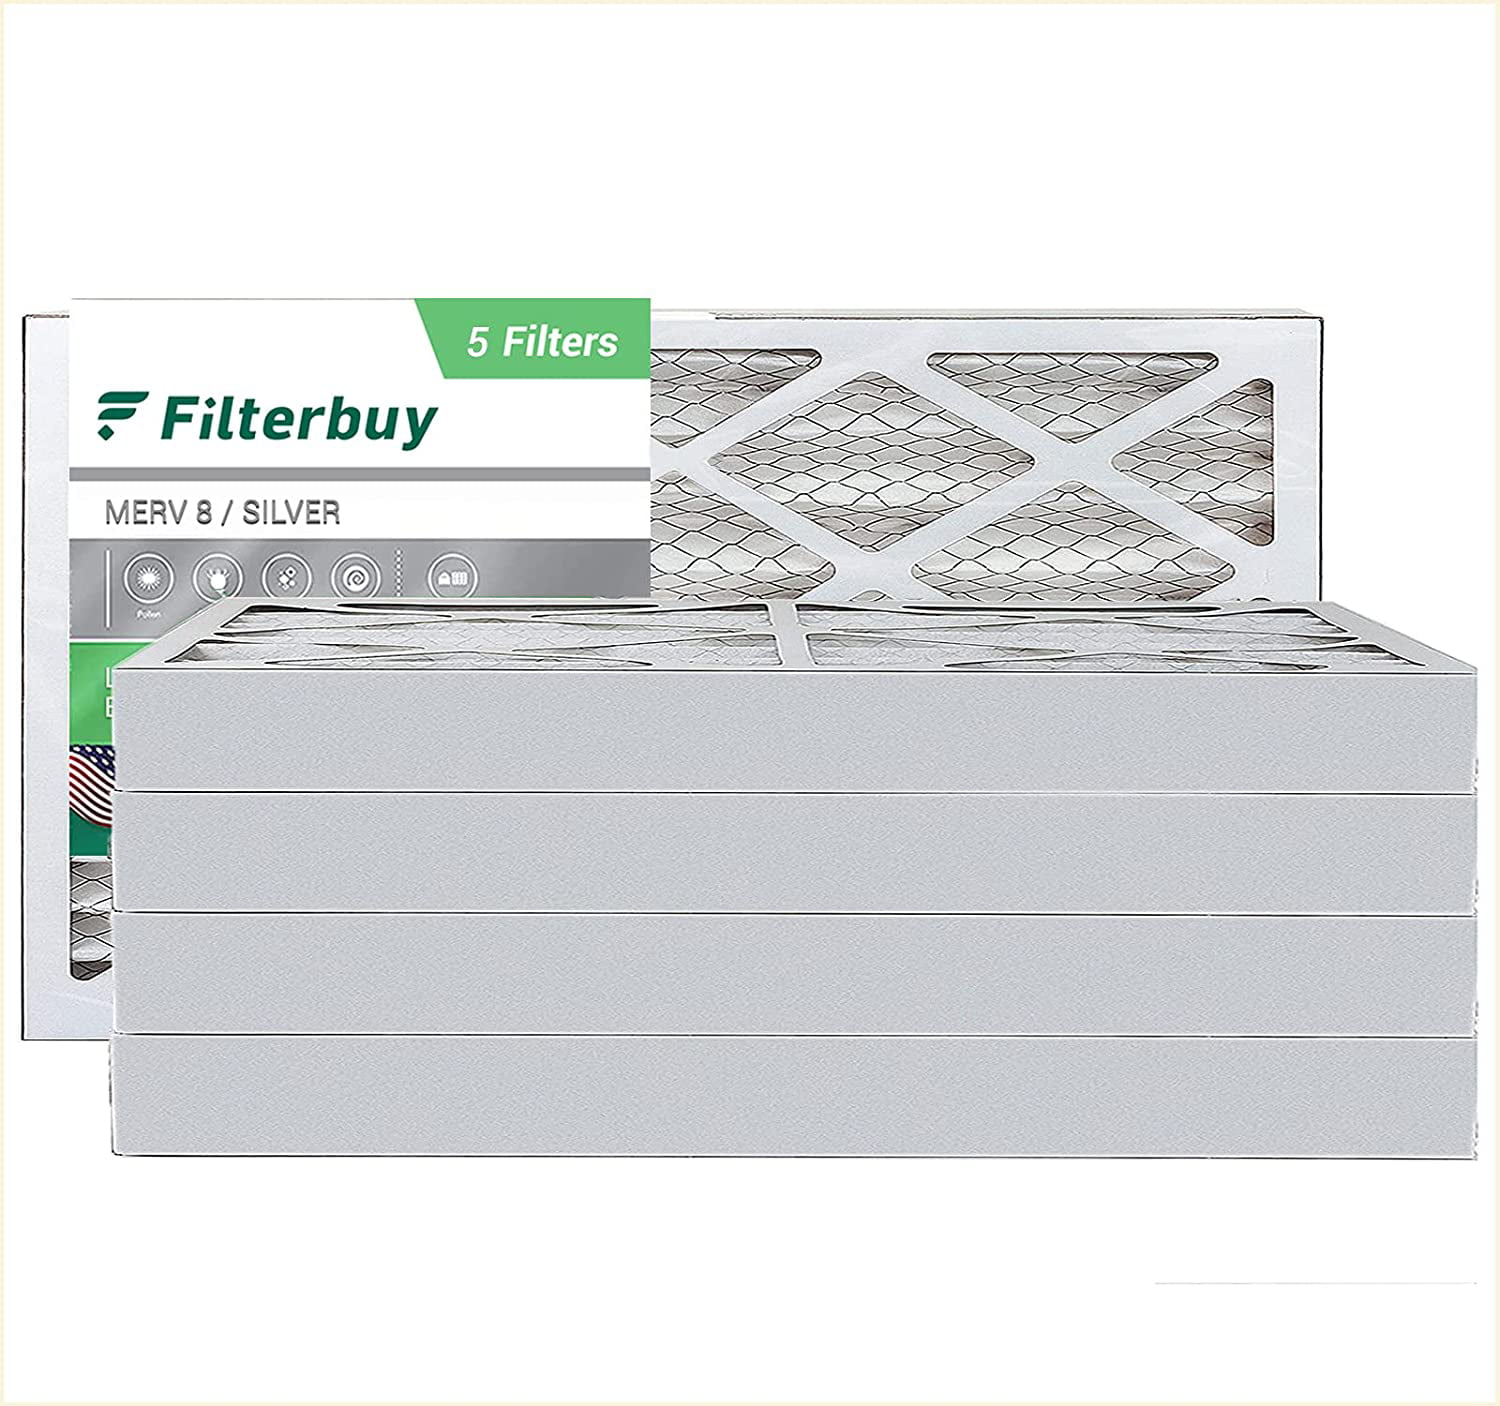 FilterBuy 15x25x4 MERV 8 Pleated AC Furnace Air Filter, Pack of 4 Filters Silver 15x25x4 